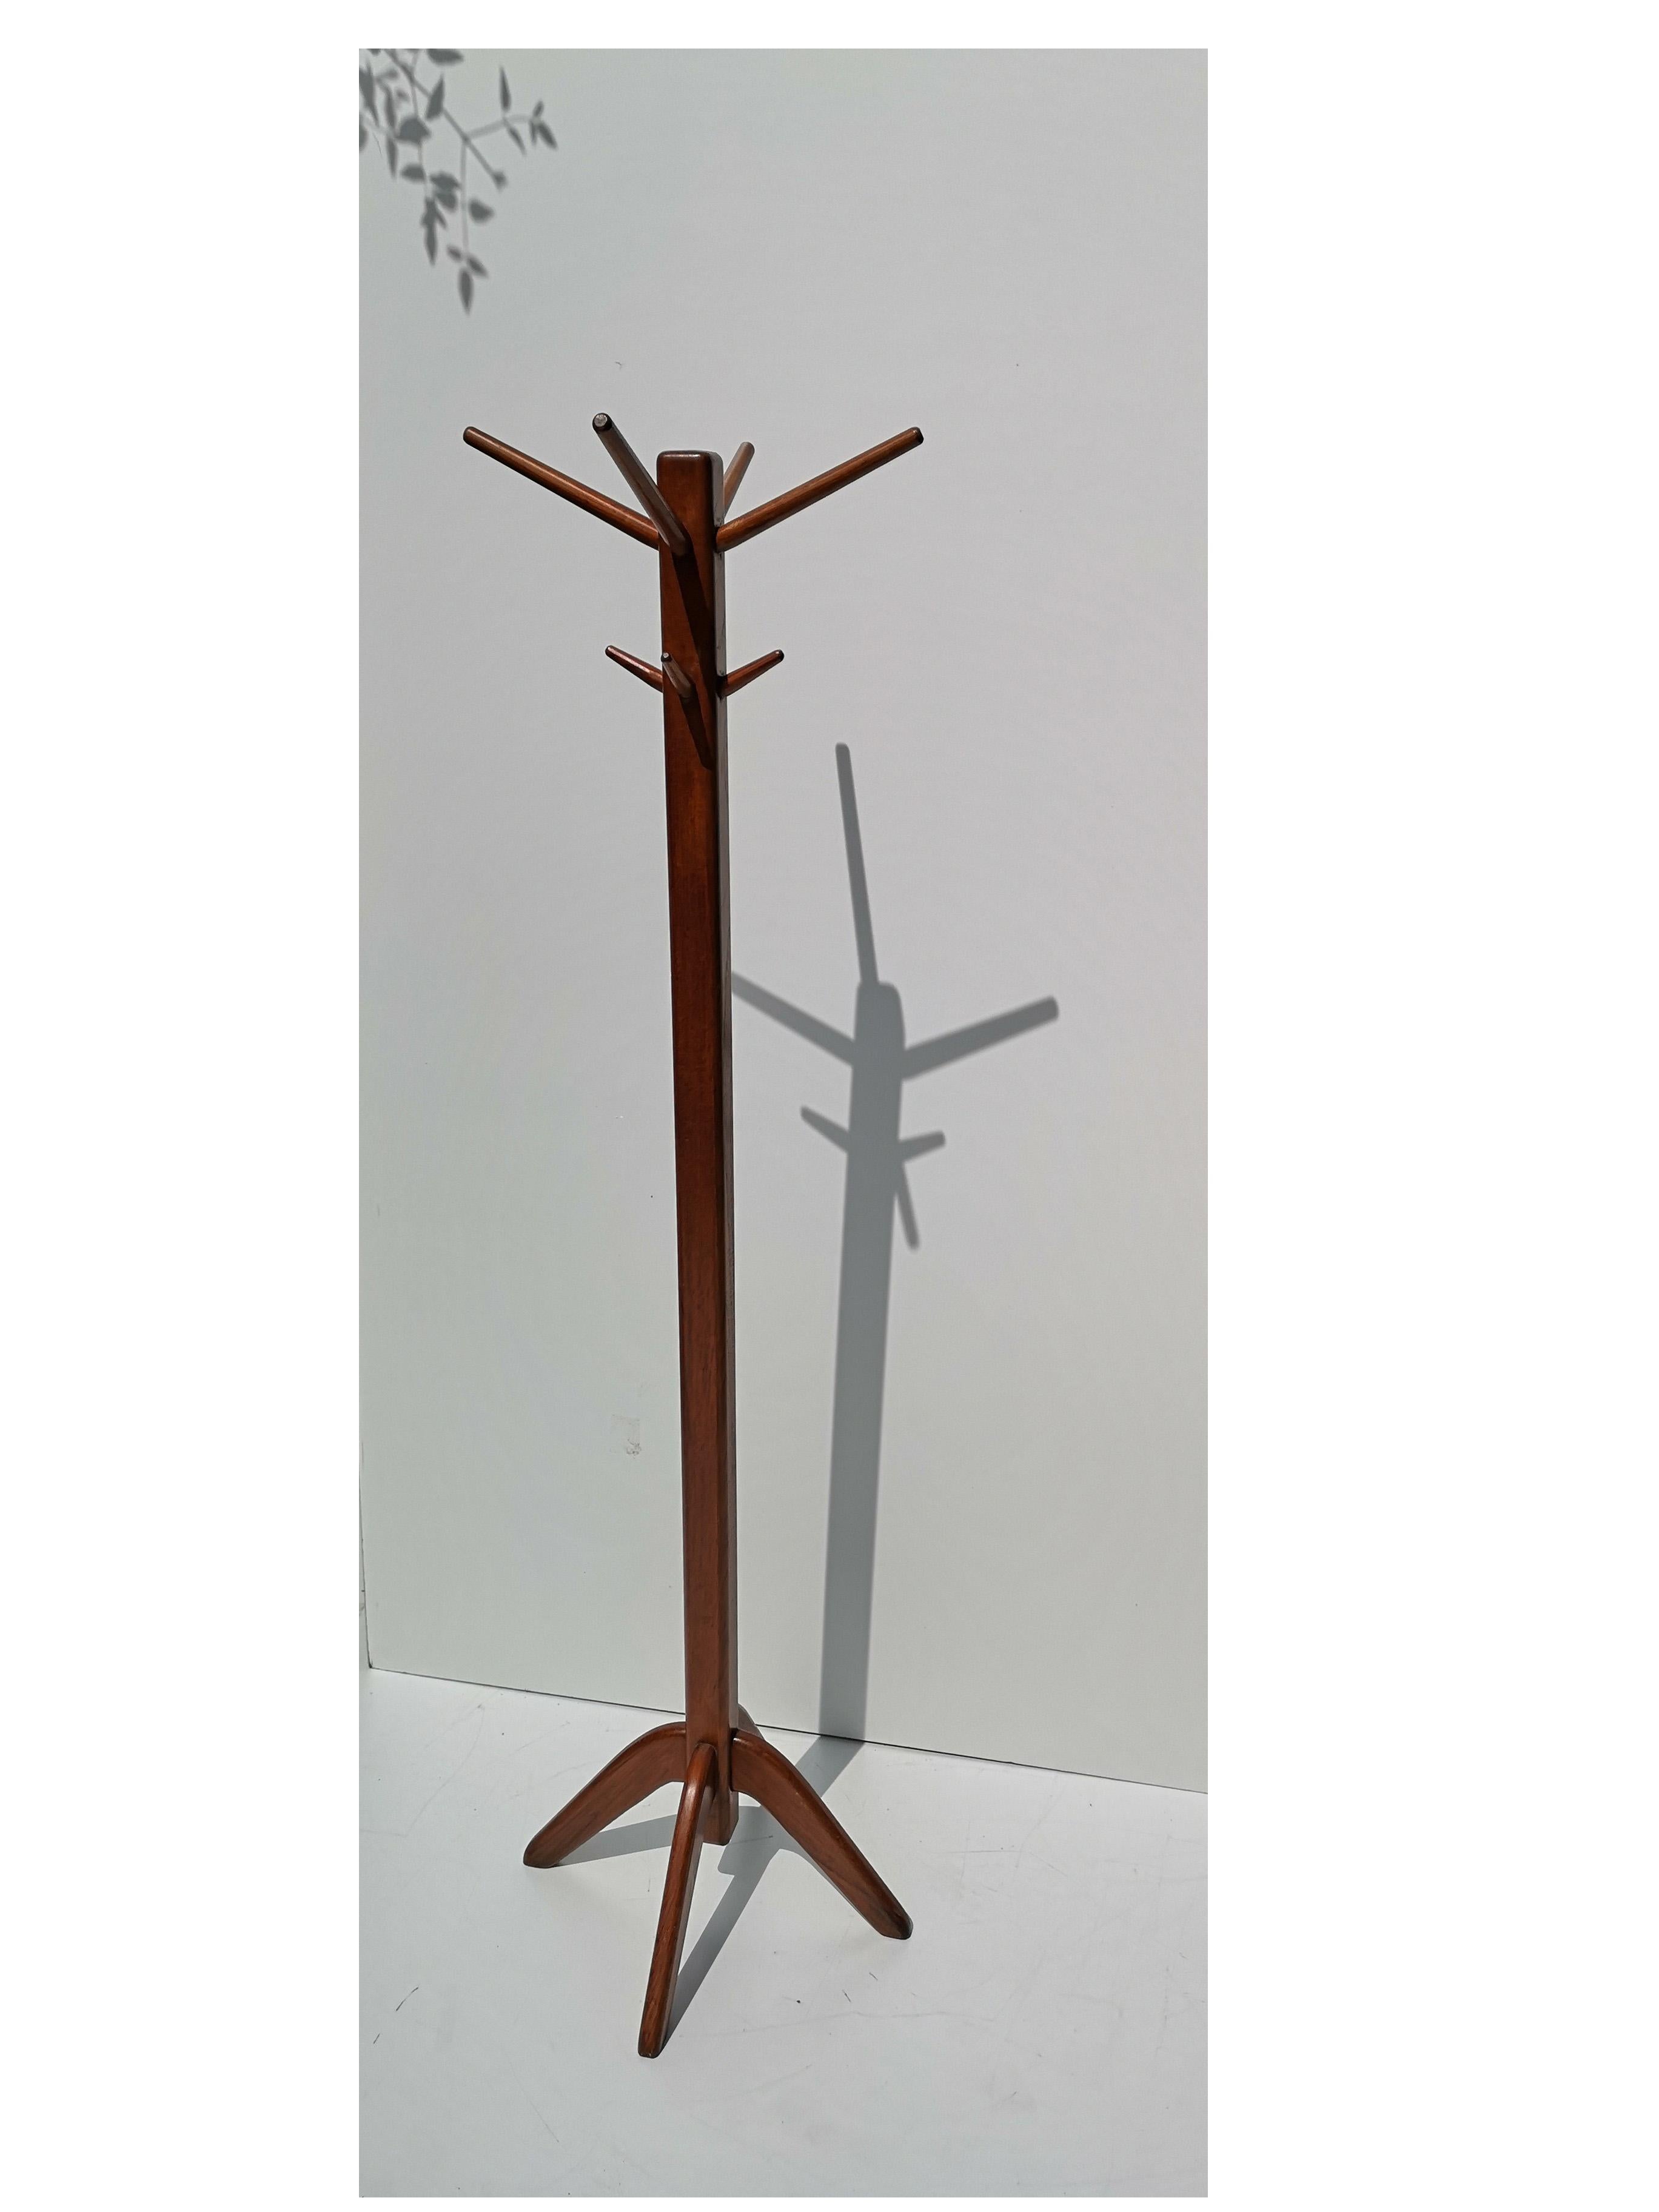 Coat racks are especially uncommon in the world of midcentury Danish modernism. This particular piece has interesting, angular solid teak construction, and is in nice original condition. 

62 1/4